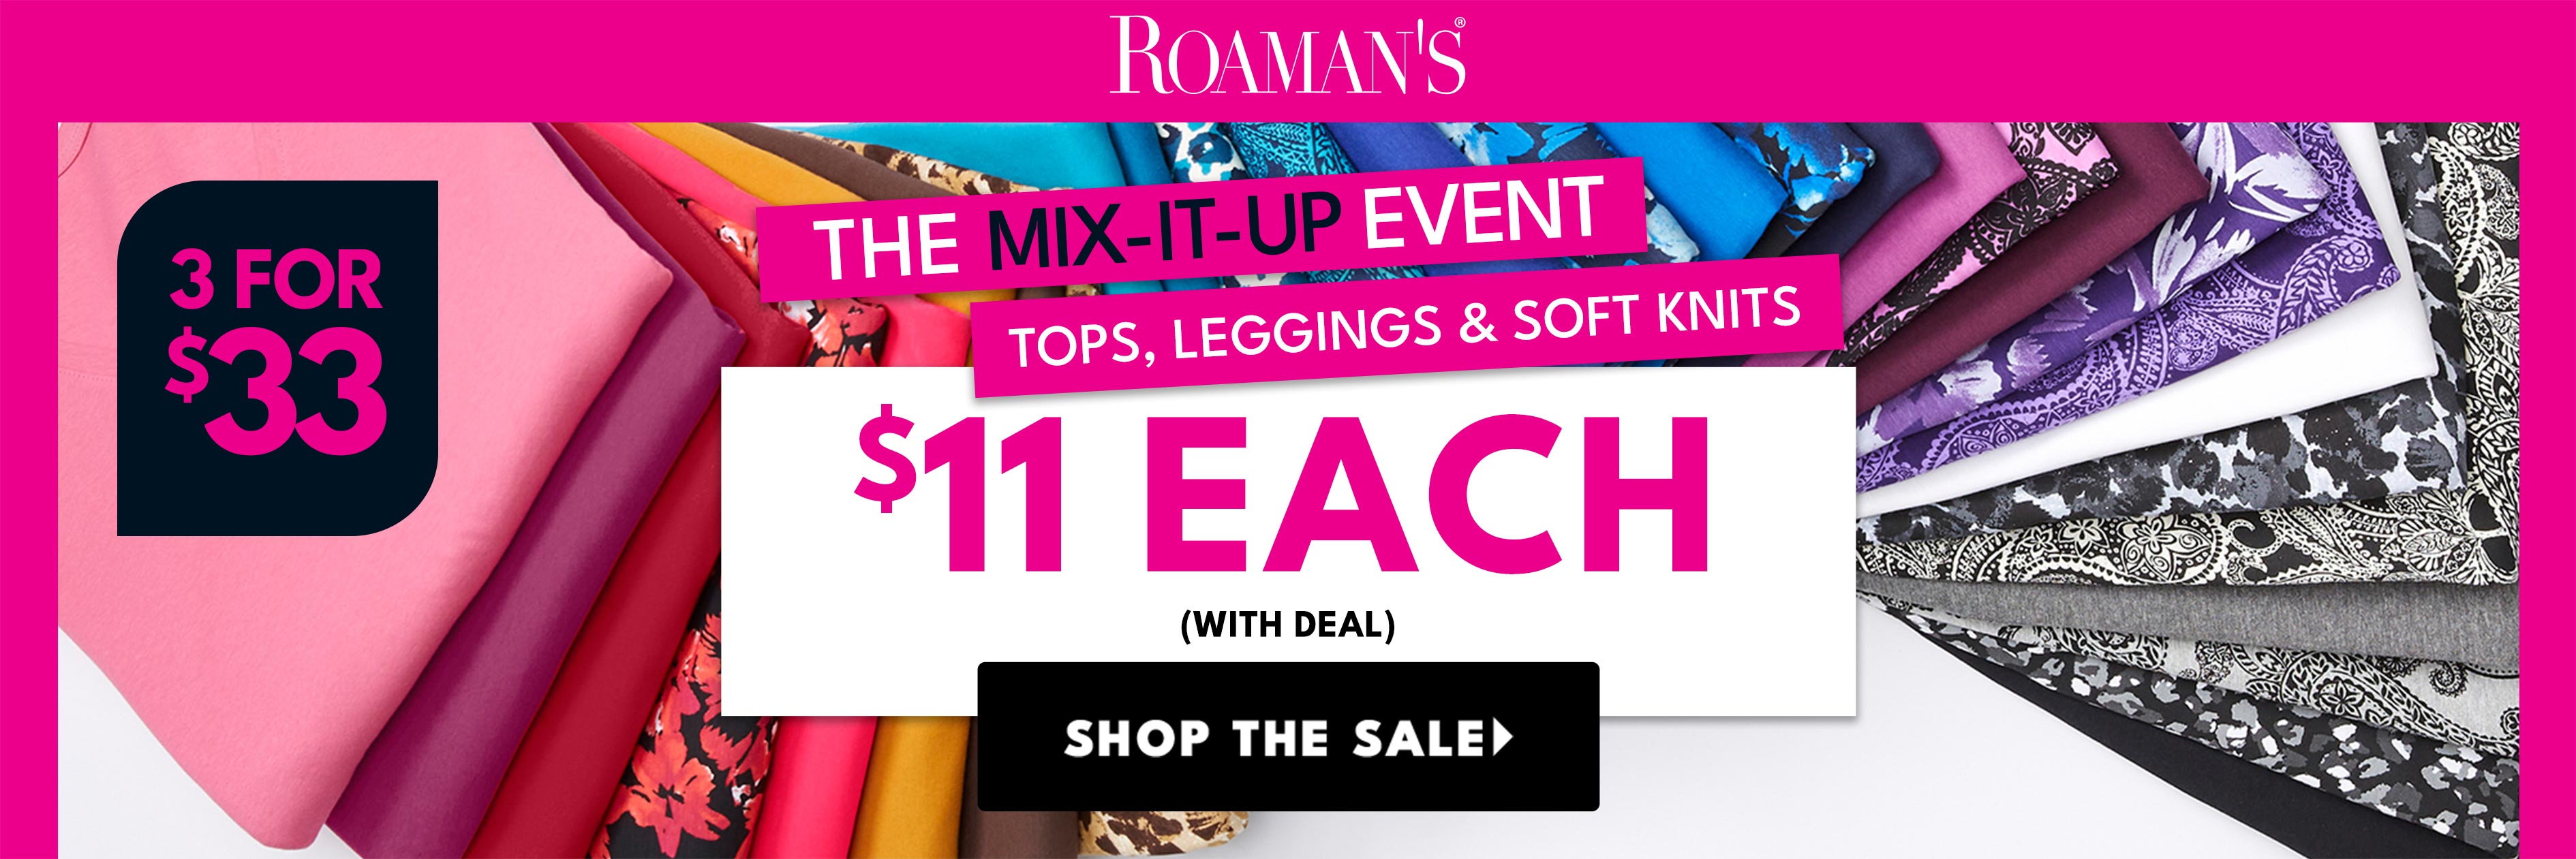 Romans3 for 33 the mix it up event $11 each with deal shop the sale